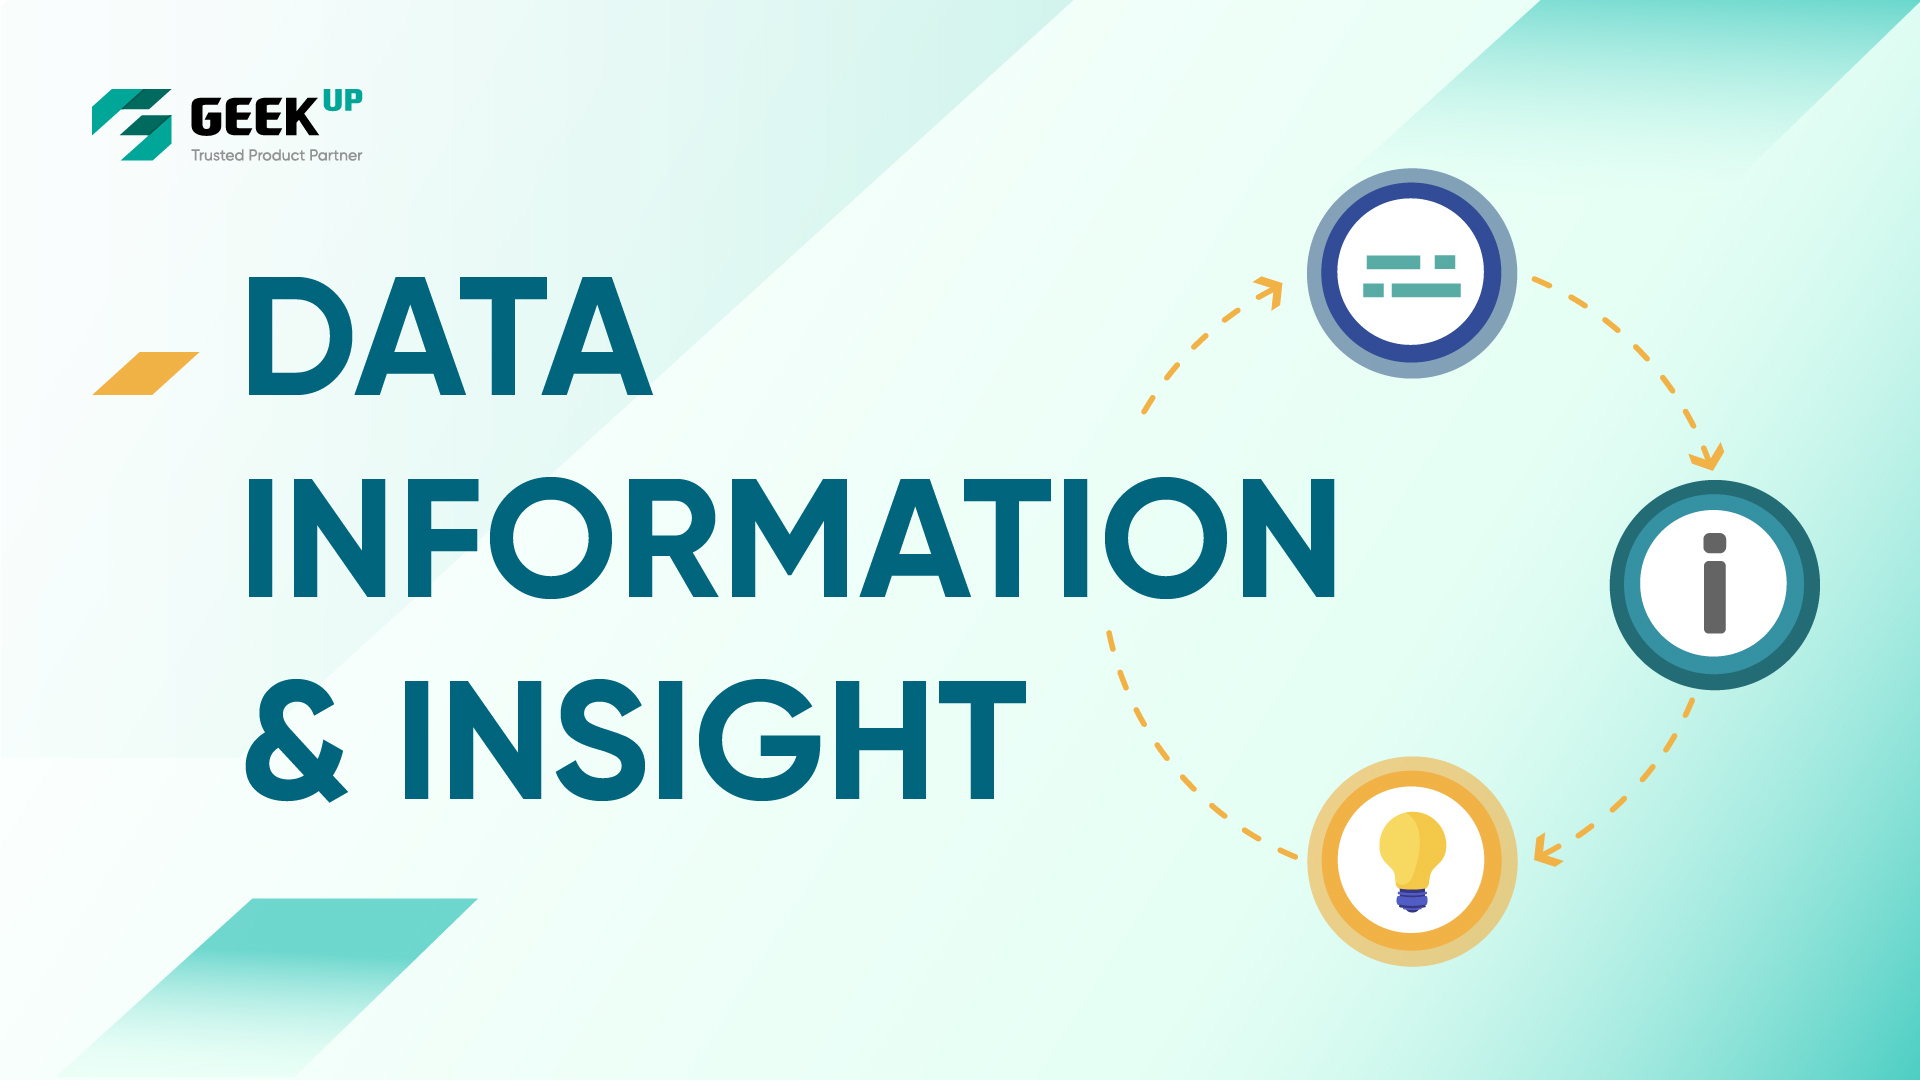 Data, Information & Insights - 3 steps to turn data into sales